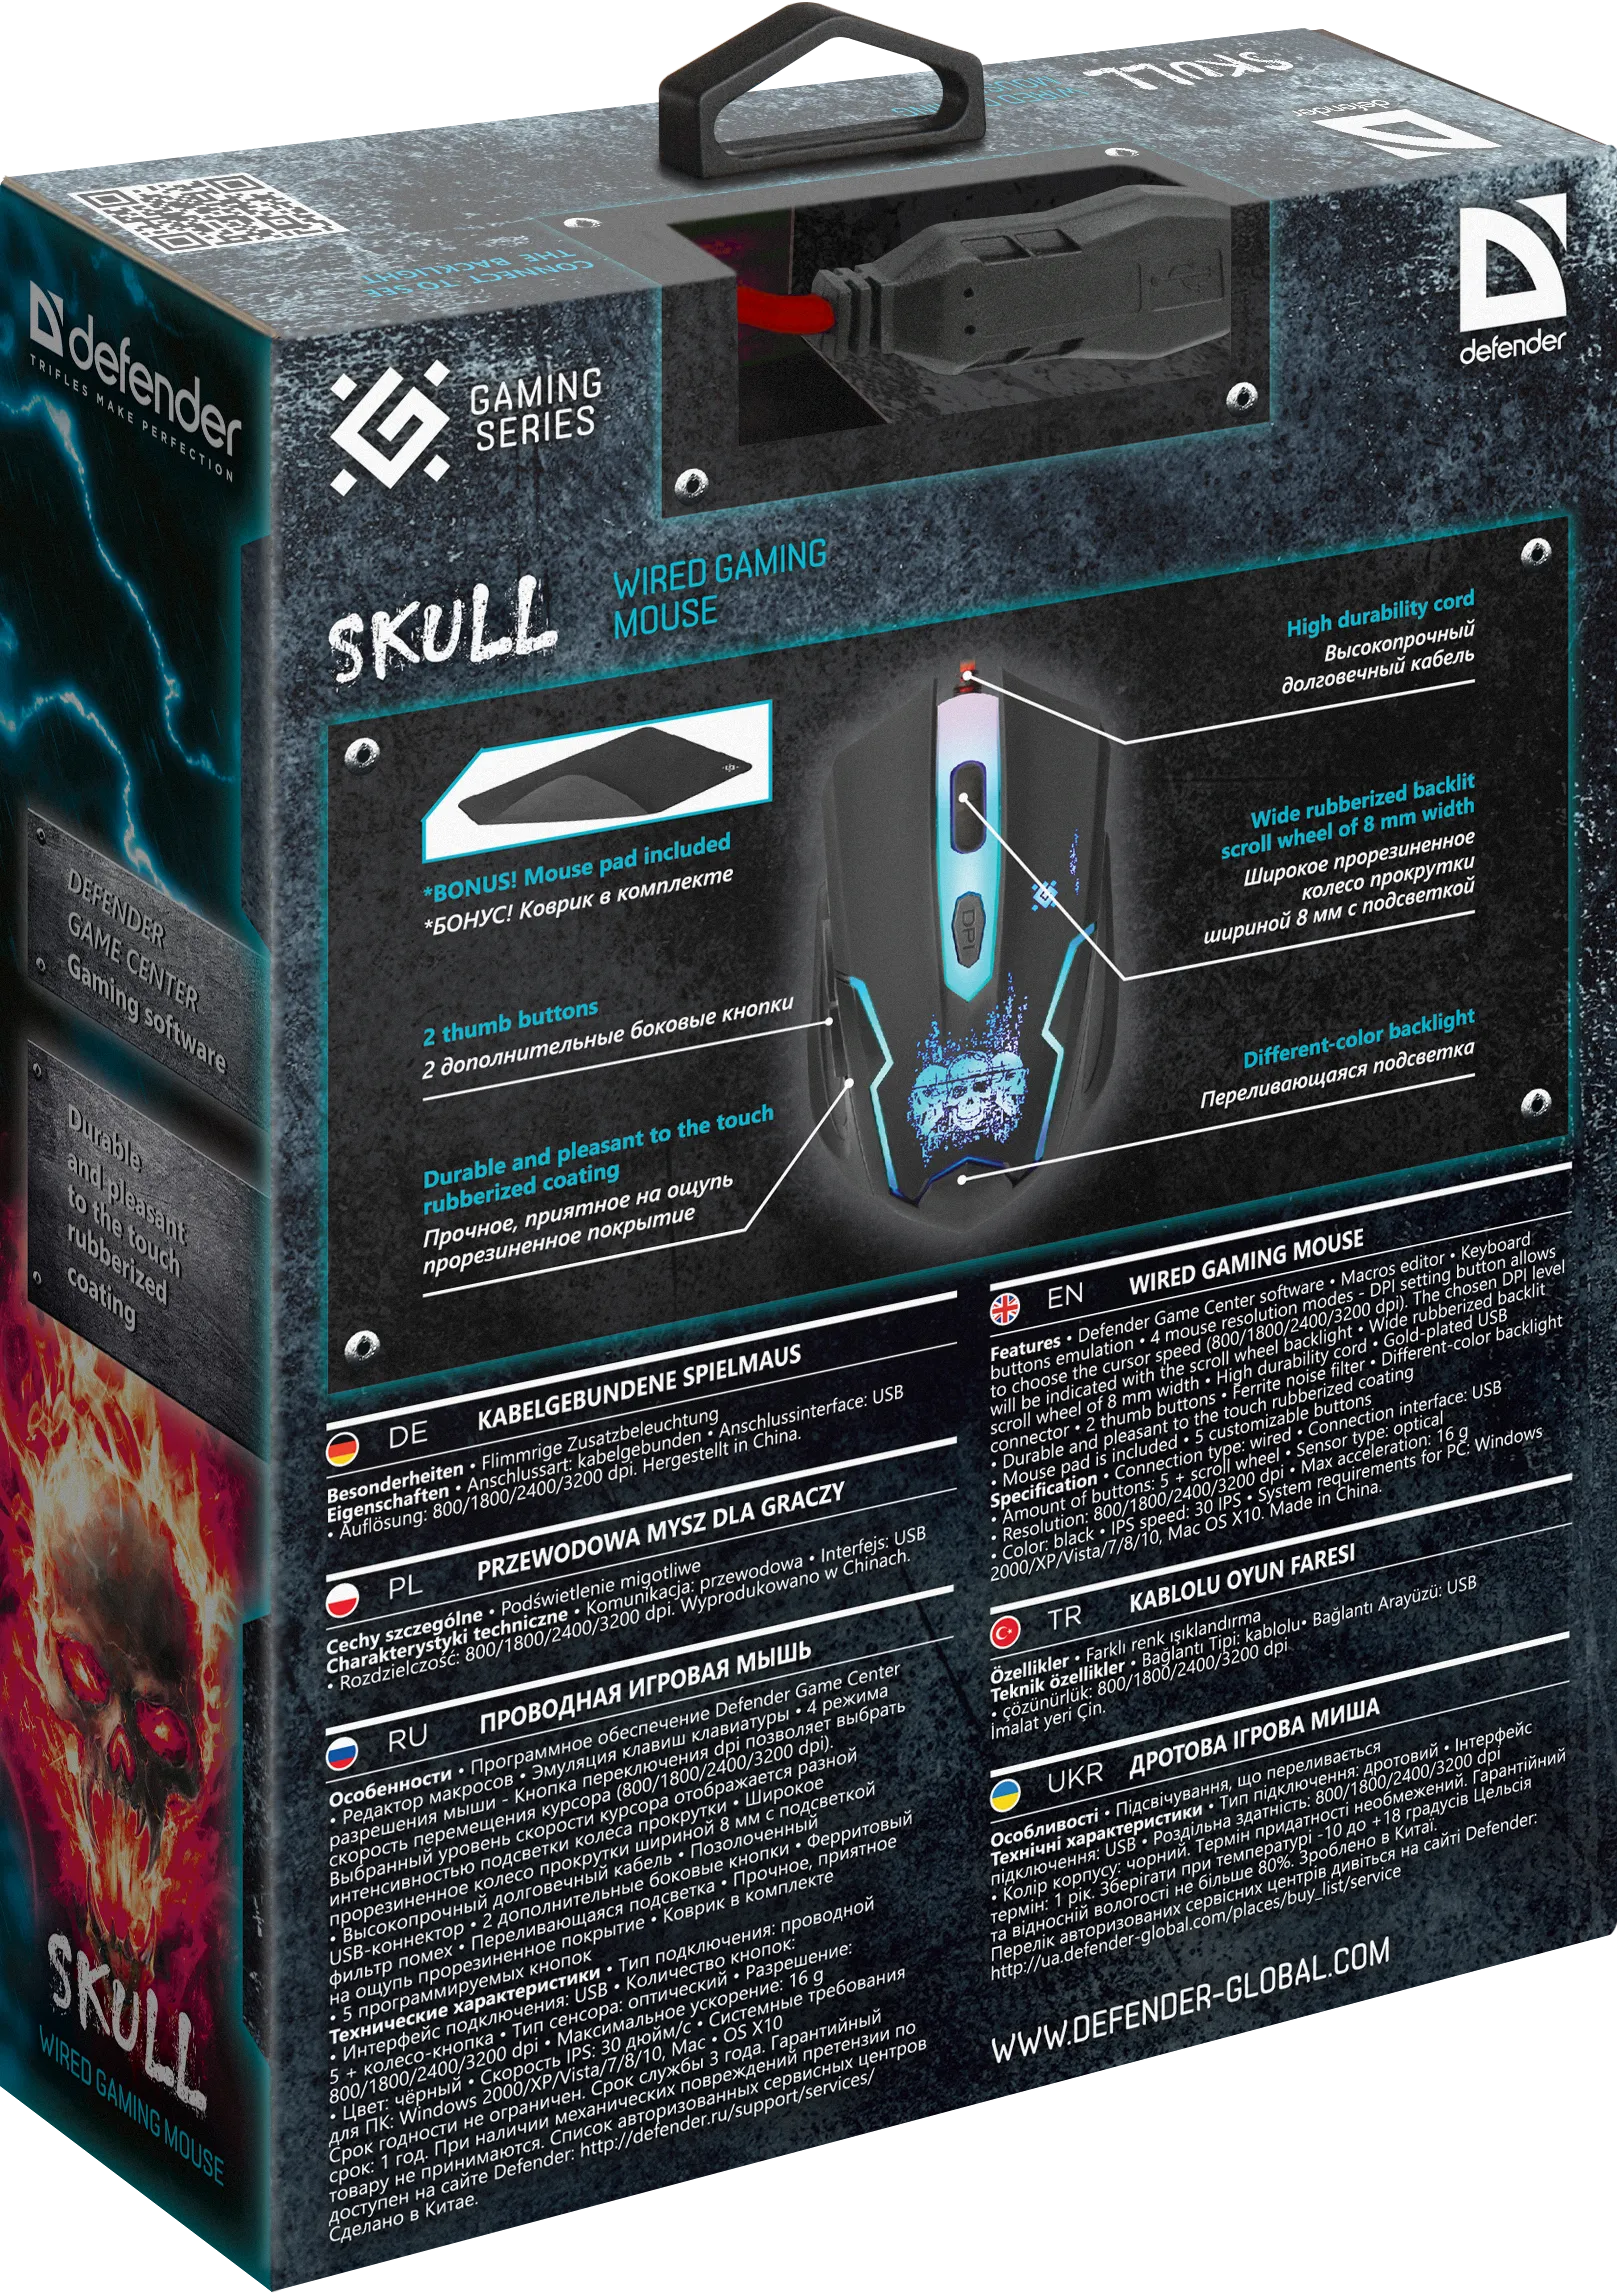 gaming-cdn.com/images/products/3434/380x218/skull